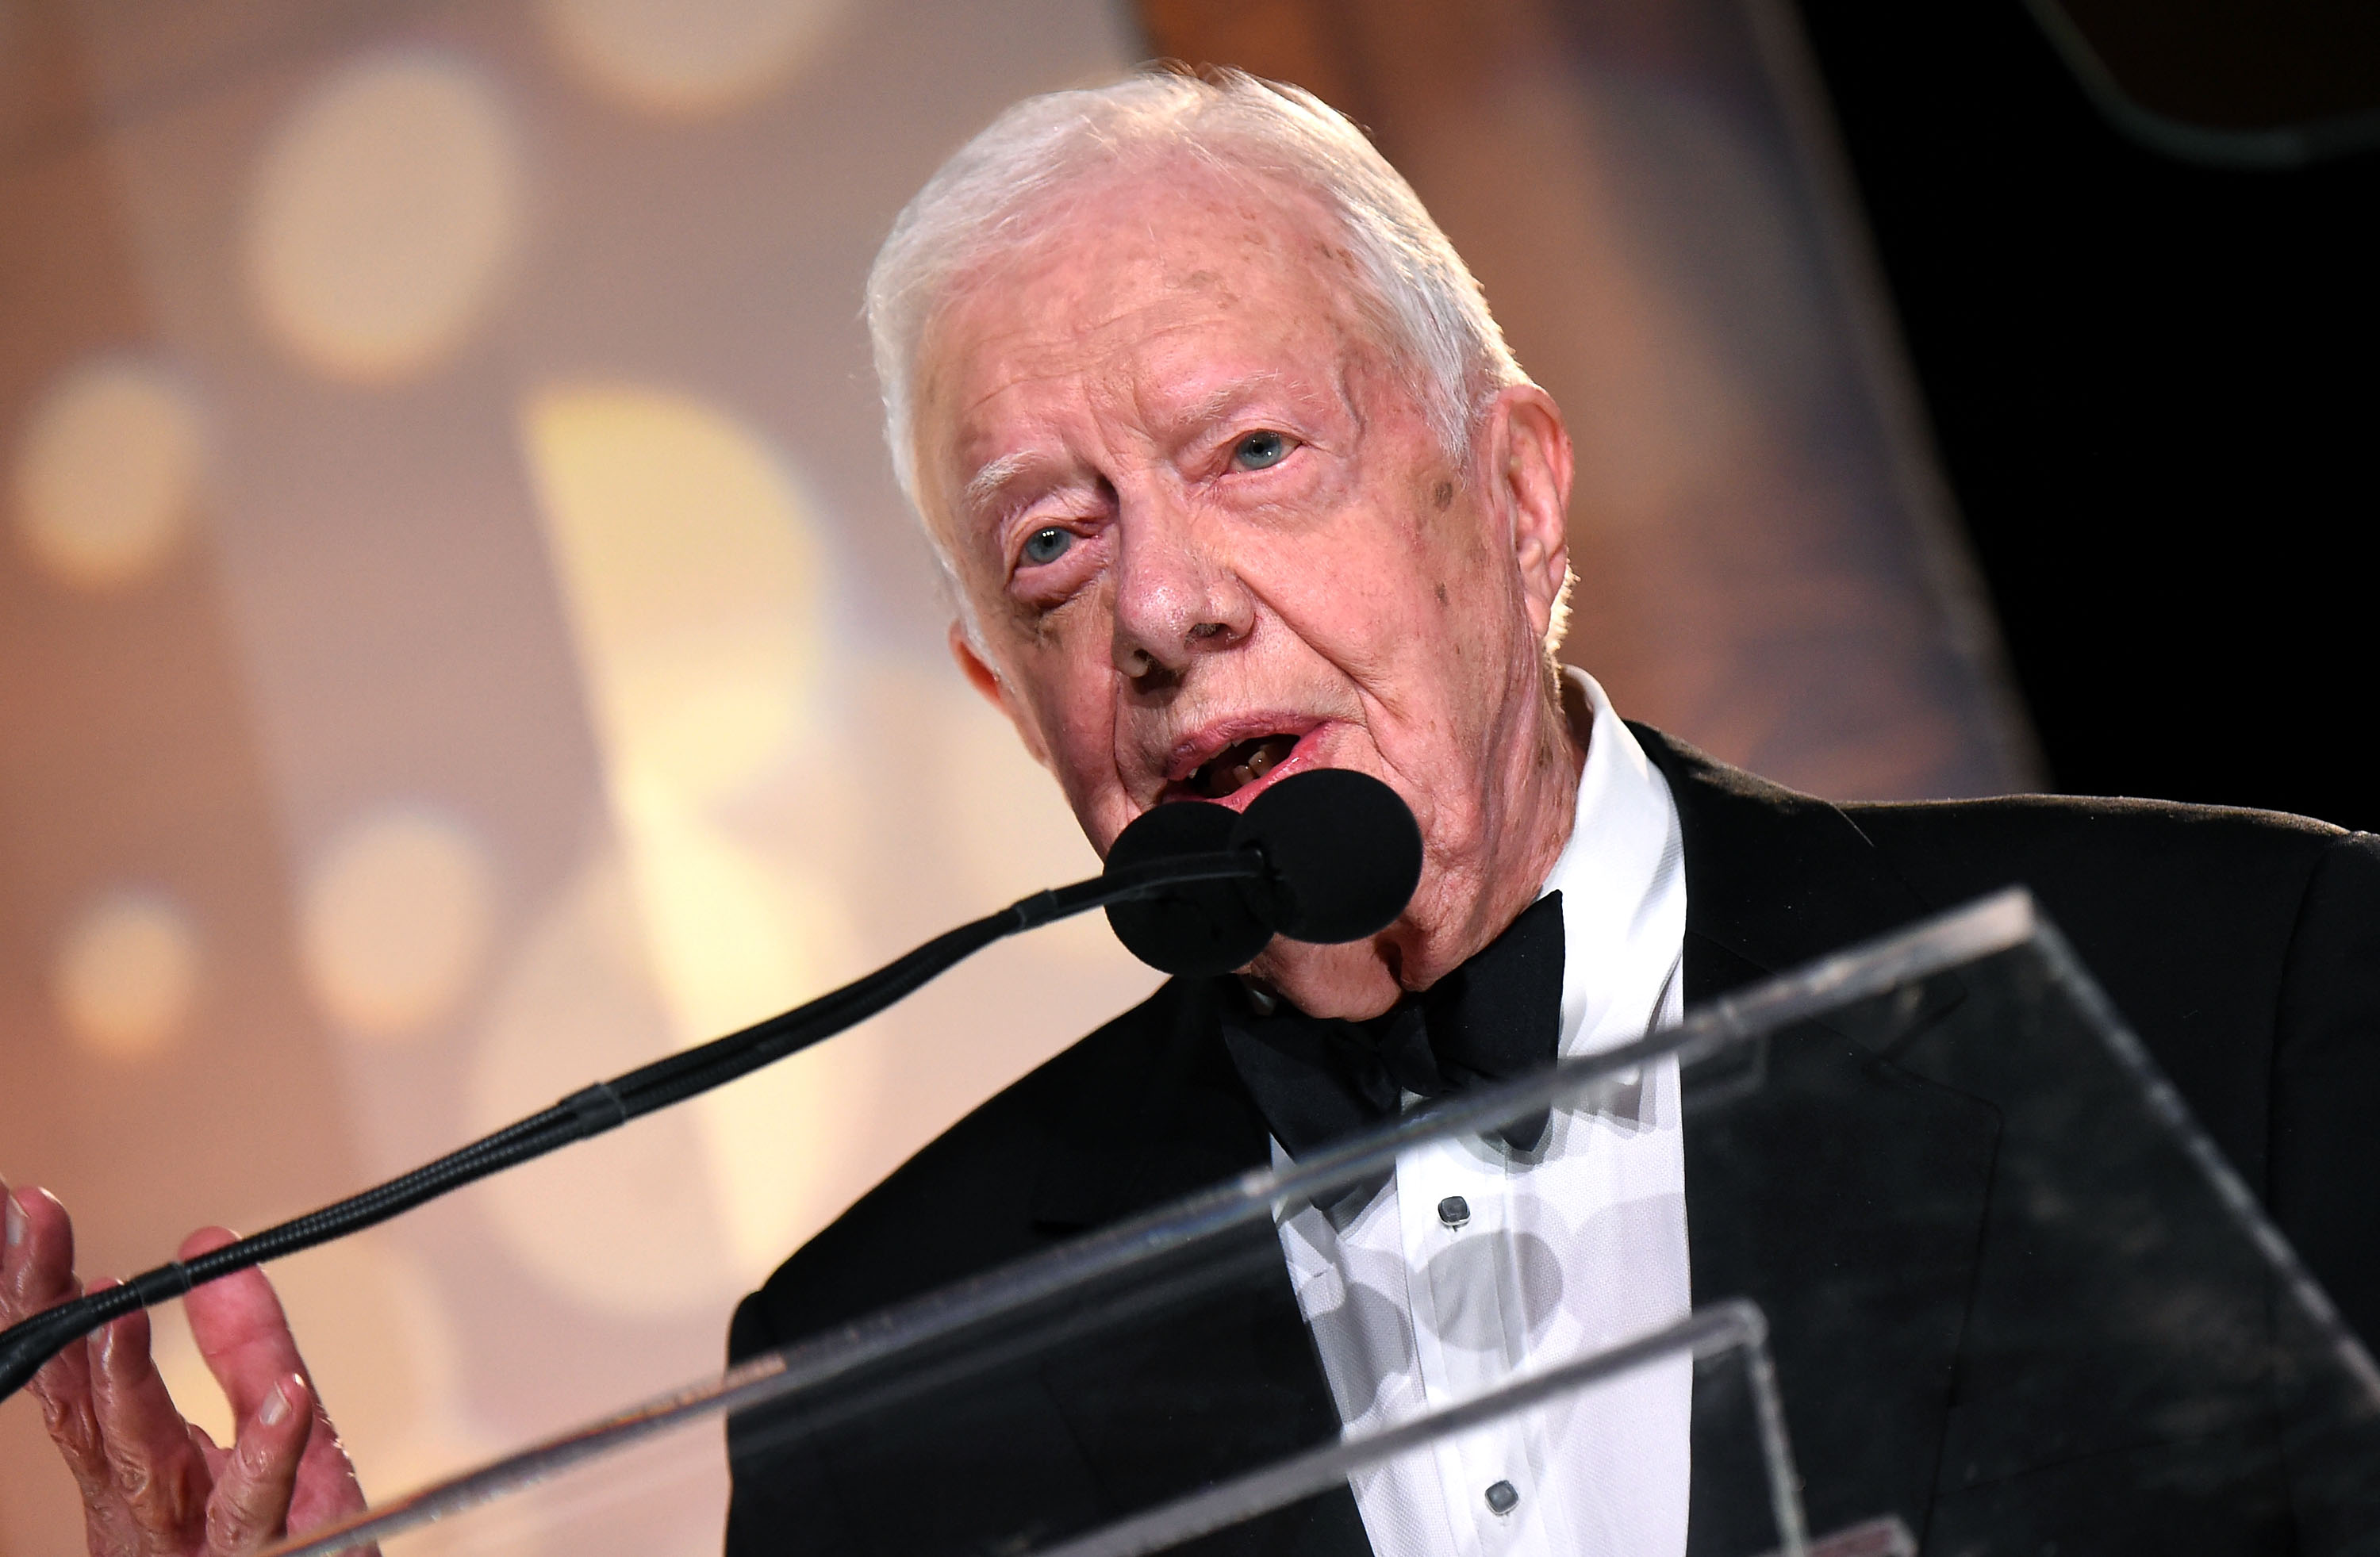 President Jimmy Carter presents Trisha Yearwood (not pictured) with the Voice of Music Award during the 53rd annual ASCAP Country Music awards at the Omni Hotel on Nov. 2, 2015 in Nashville. (Michael Loccisano—Getty Images)